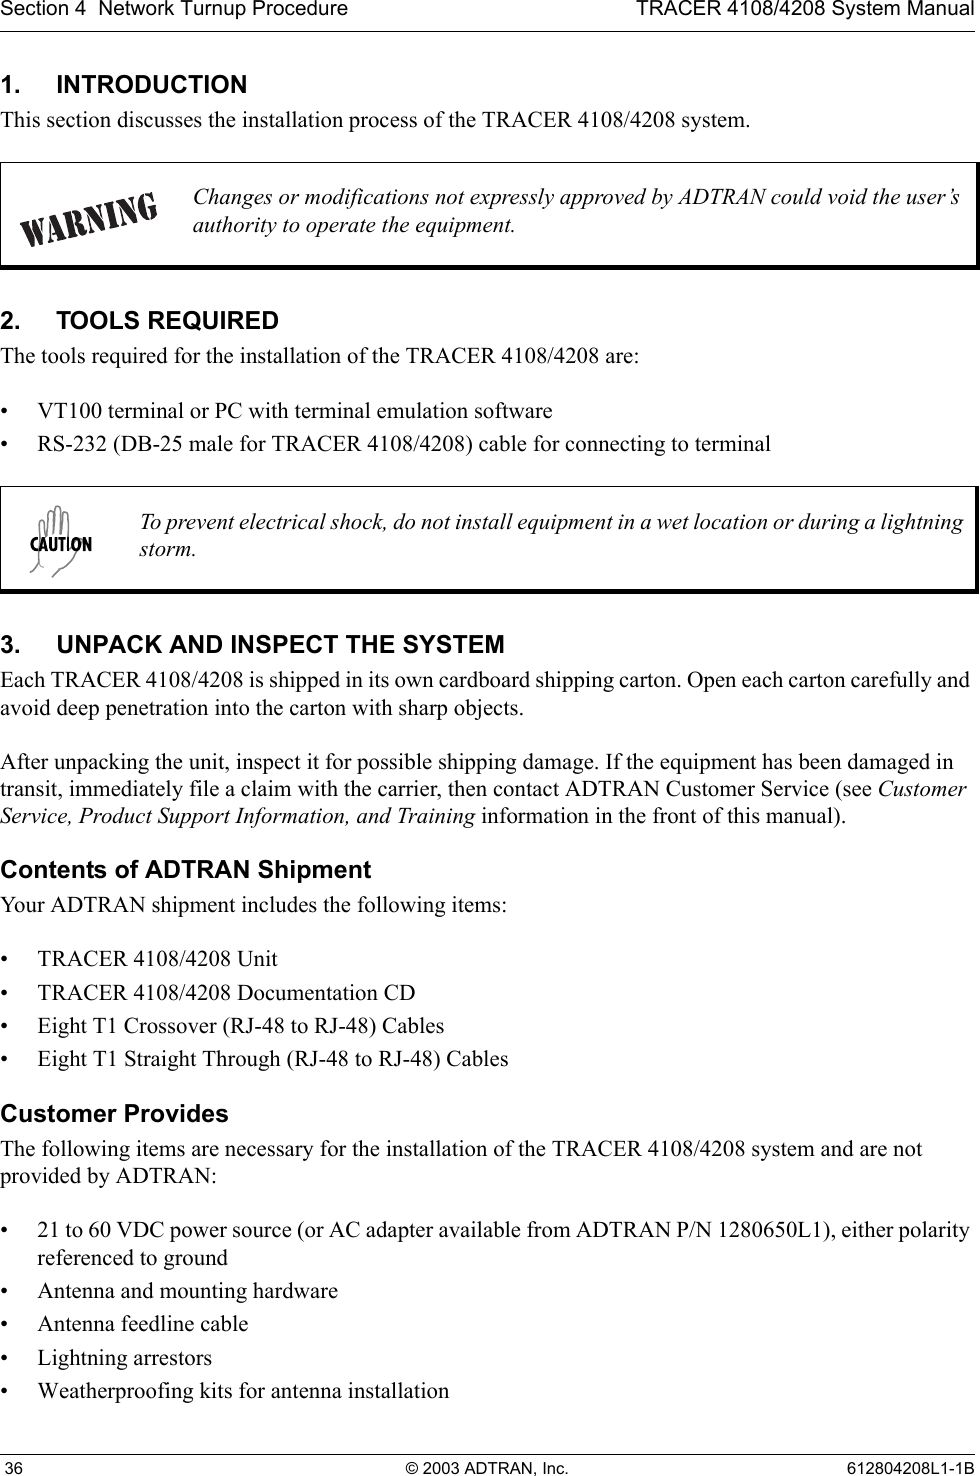 Section 4  Network Turnup Procedure TRACER 4108/4208 System Manual 36 © 2003 ADTRAN, Inc. 612804208L1-1B1. INTRODUCTIONThis section discusses the installation process of the TRACER 4108/4208 system.2. TOOLS REQUIREDThe tools required for the installation of the TRACER 4108/4208 are:• VT100 terminal or PC with terminal emulation software• RS-232 (DB-25 male for TRACER 4108/4208) cable for connecting to terminal3. UNPACK AND INSPECT THE SYSTEMEach TRACER 4108/4208 is shipped in its own cardboard shipping carton. Open each carton carefully and avoid deep penetration into the carton with sharp objects. After unpacking the unit, inspect it for possible shipping damage. If the equipment has been damaged in transit, immediately file a claim with the carrier, then contact ADTRAN Customer Service (see Customer Service, Product Support Information, and Training information in the front of this manual).Contents of ADTRAN ShipmentYour ADTRAN shipment includes the following items:• TRACER 4108/4208 Unit• TRACER 4108/4208 Documentation CD• Eight T1 Crossover (RJ-48 to RJ-48) Cables • Eight T1 Straight Through (RJ-48 to RJ-48) CablesCustomer ProvidesThe following items are necessary for the installation of the TRACER 4108/4208 system and are not provided by ADTRAN:• 21 to 60 VDC power source (or AC adapter available from ADTRAN P/N 1280650L1), either polarity referenced to ground• Antenna and mounting hardware• Antenna feedline cable• Lightning arrestors• Weatherproofing kits for antenna installationChanges or modifications not expressly approved by ADTRAN could void the user’s authority to operate the equipment.To prevent electrical shock, do not install equipment in a wet location or during a lightning storm.